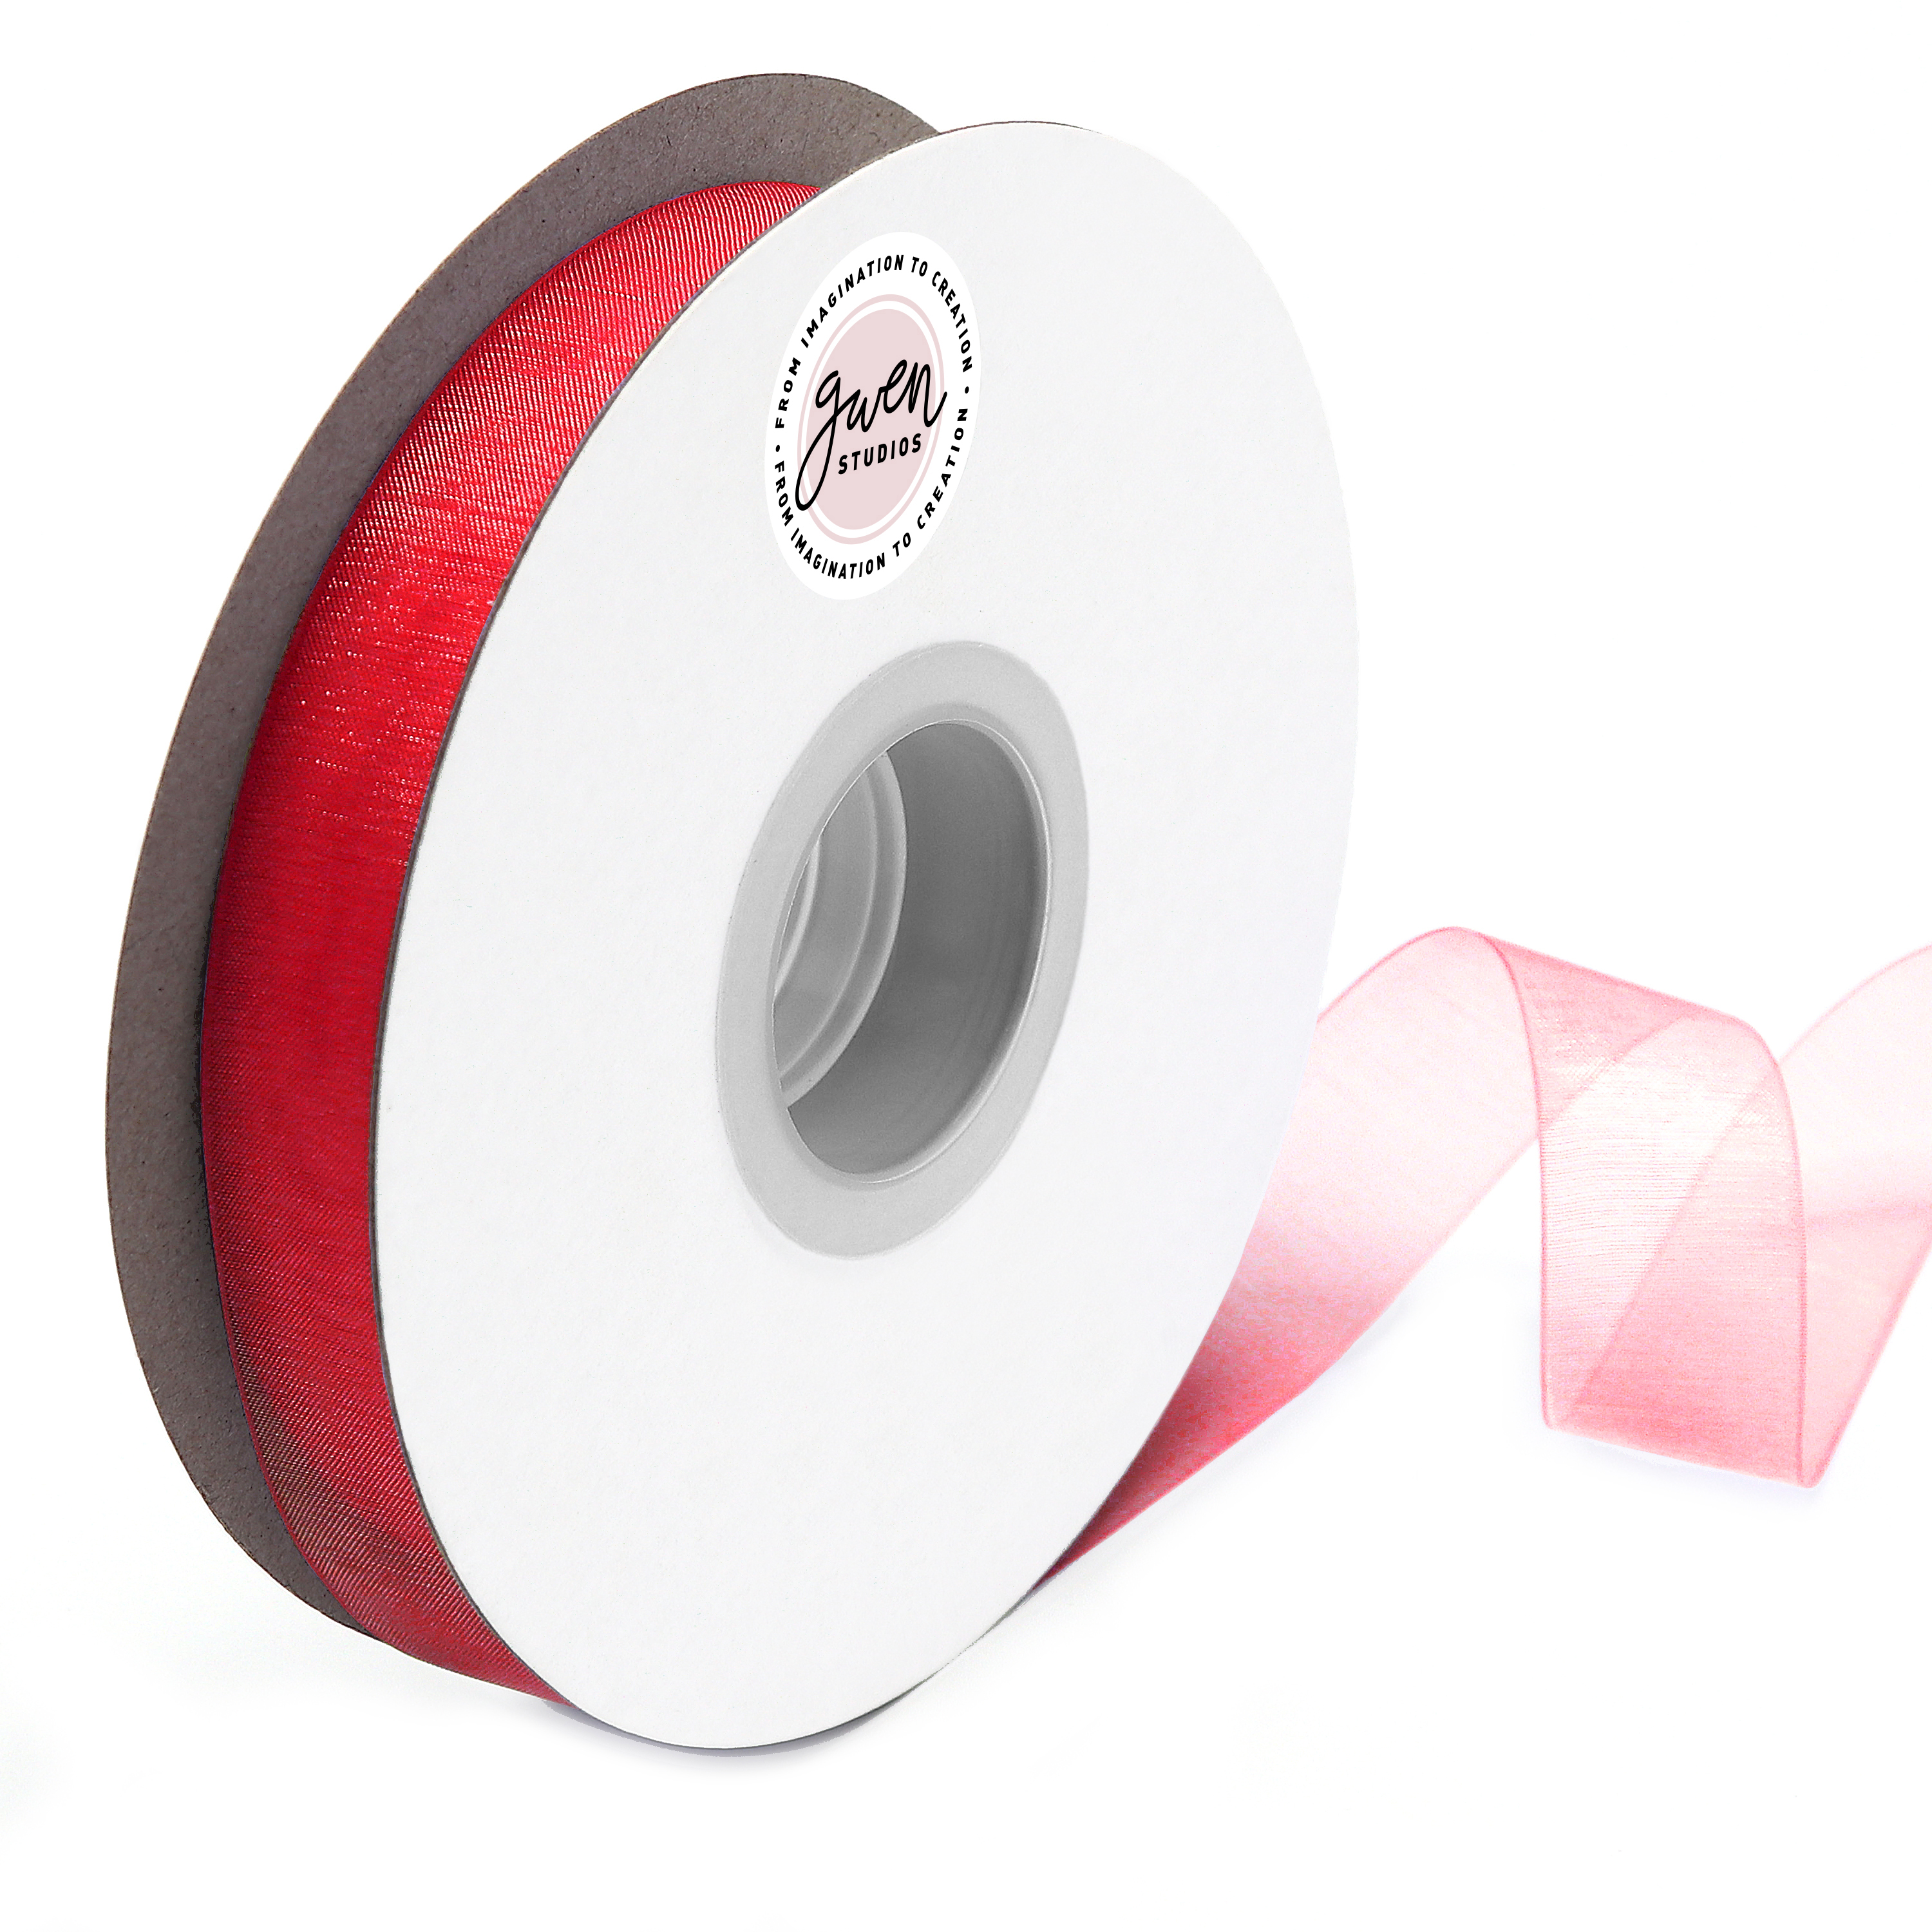 Red Sheer Organza Ribbon for Crafts and Gift Wrap, 7/8" x 100 Yards by Gwen Studios - image 1 of 4